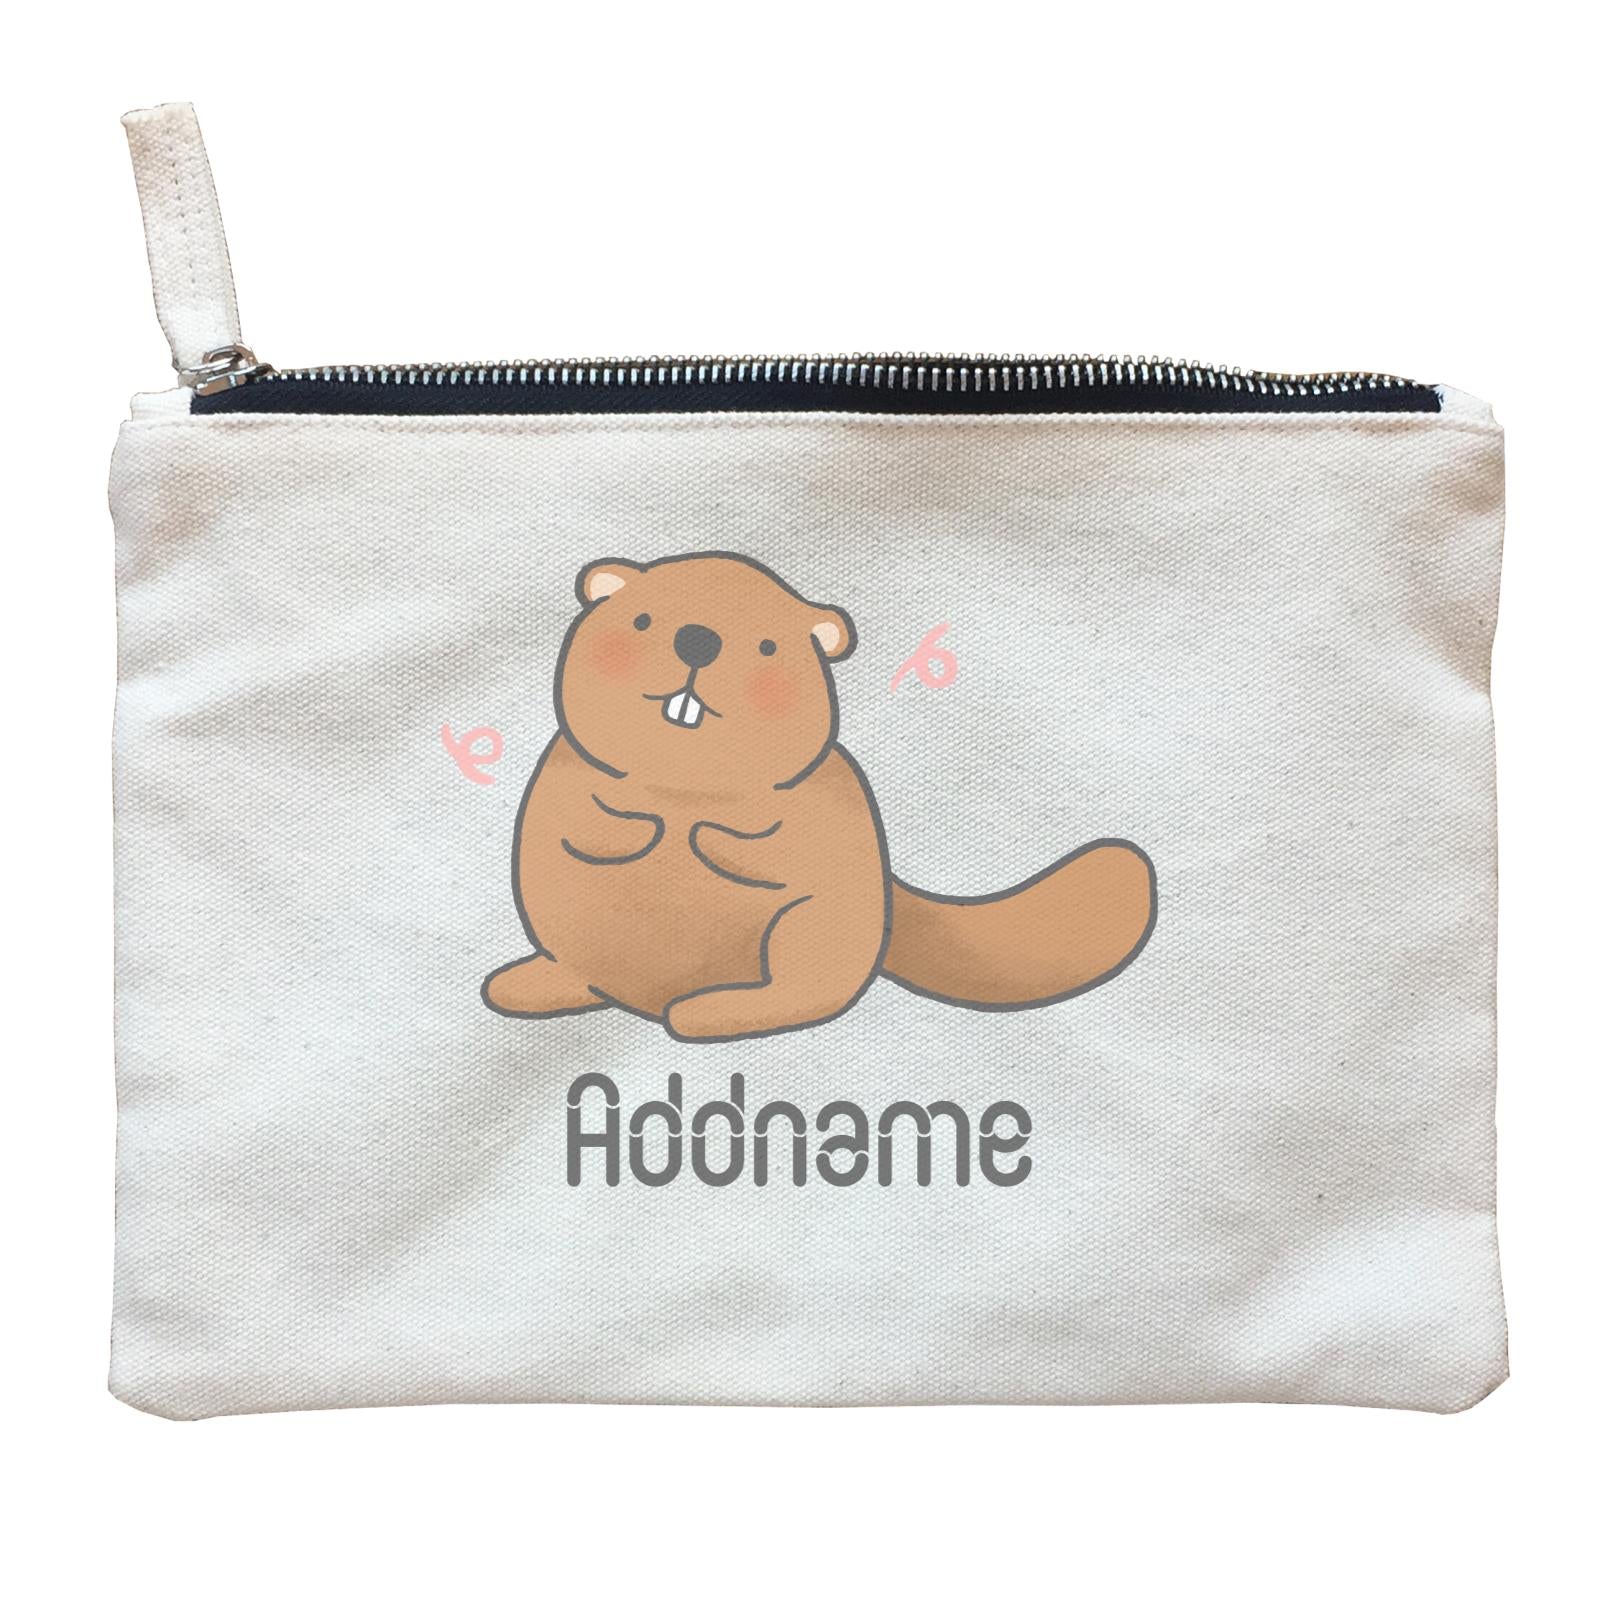 Cute Hand Drawn Style Beaver Addname Zipper Pouch